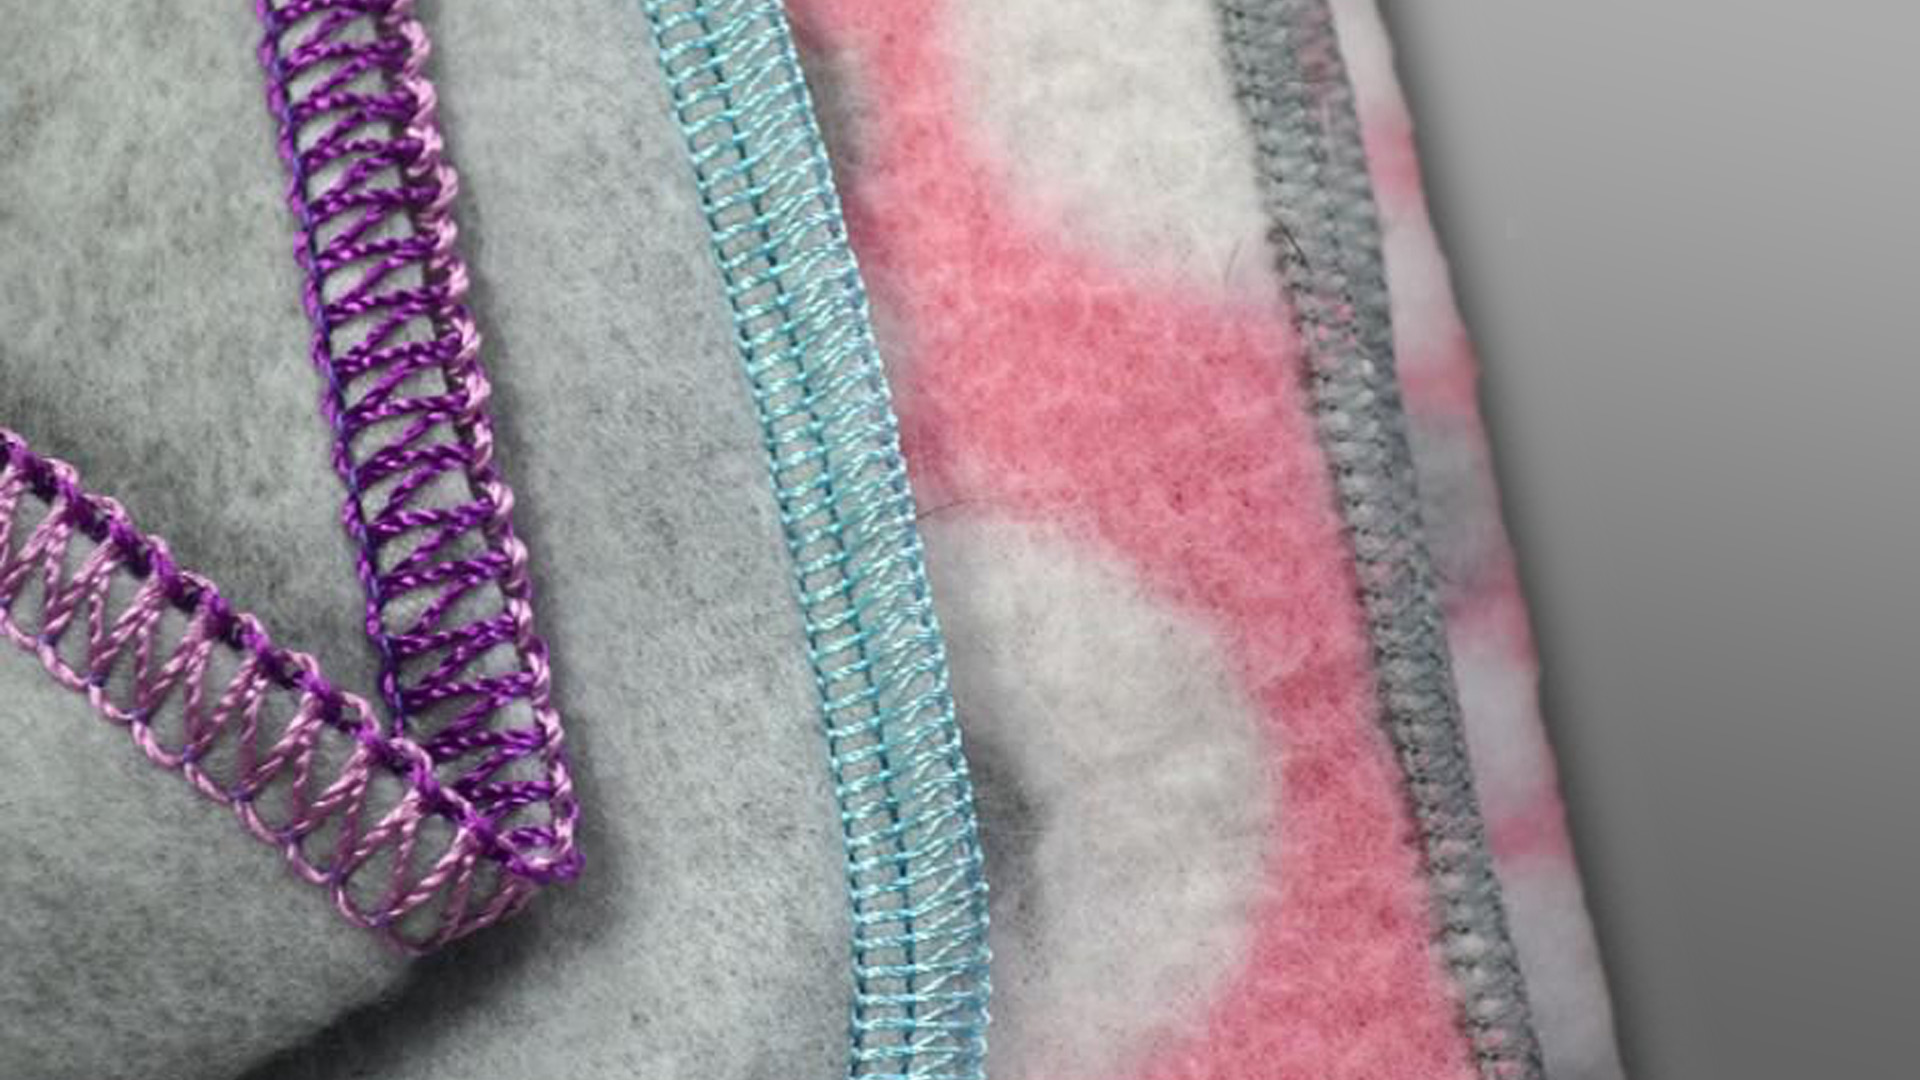 Making Friends With Your Serger: Decorative Stitches